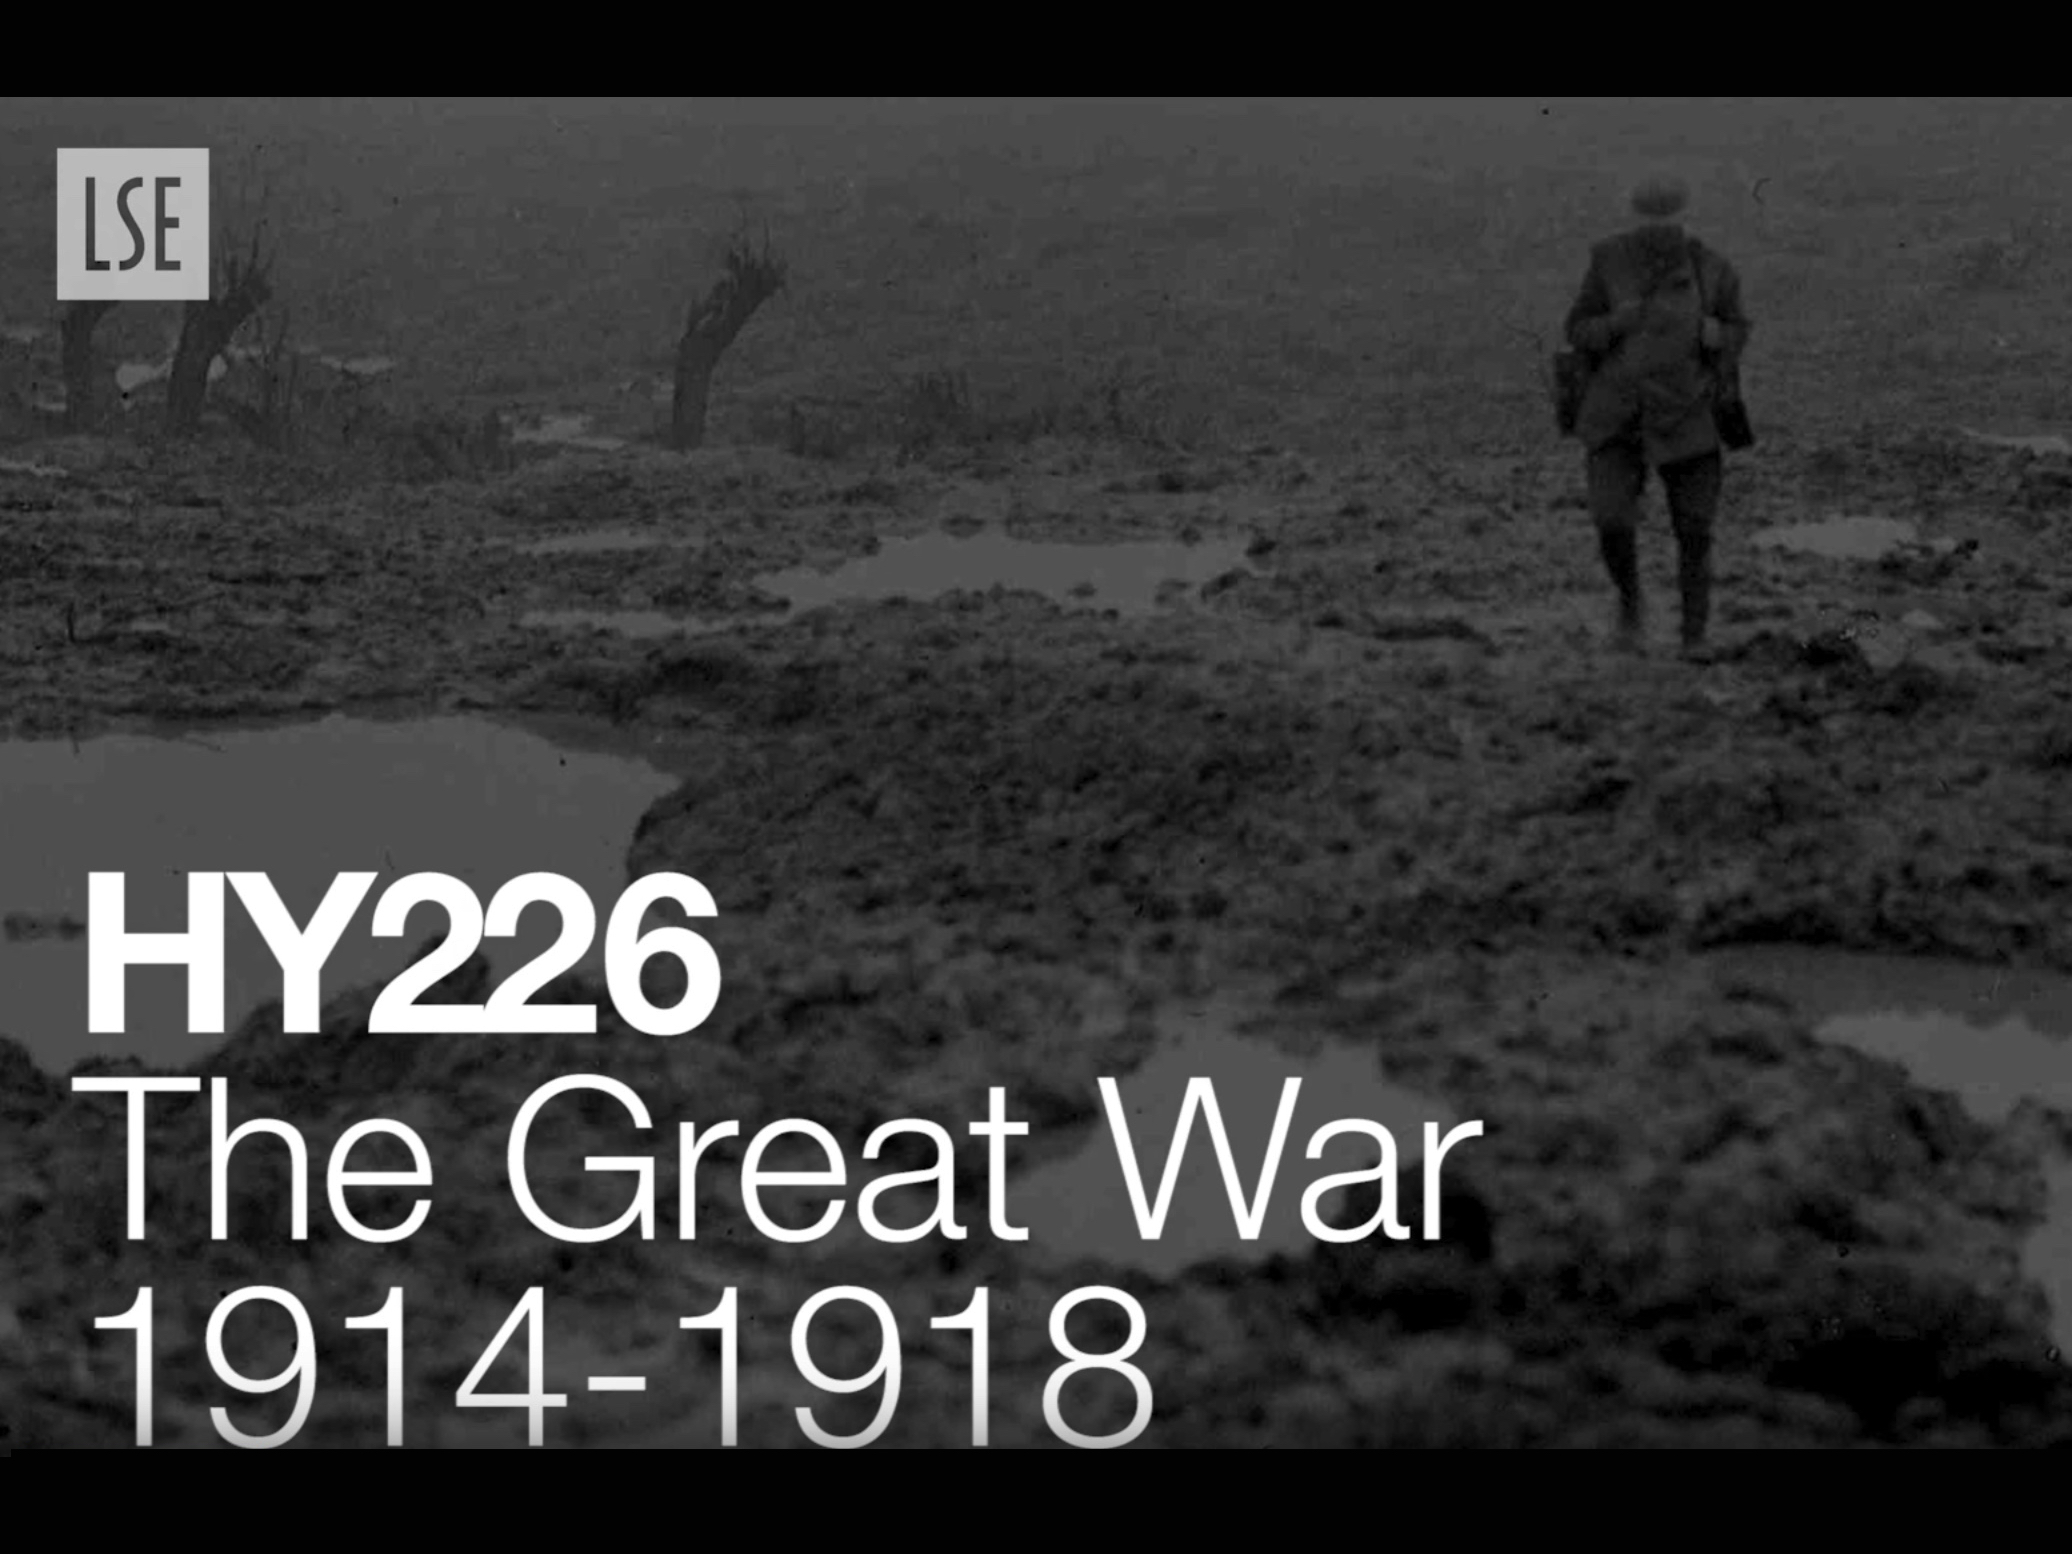 HY226: The Great War, 1914-1918